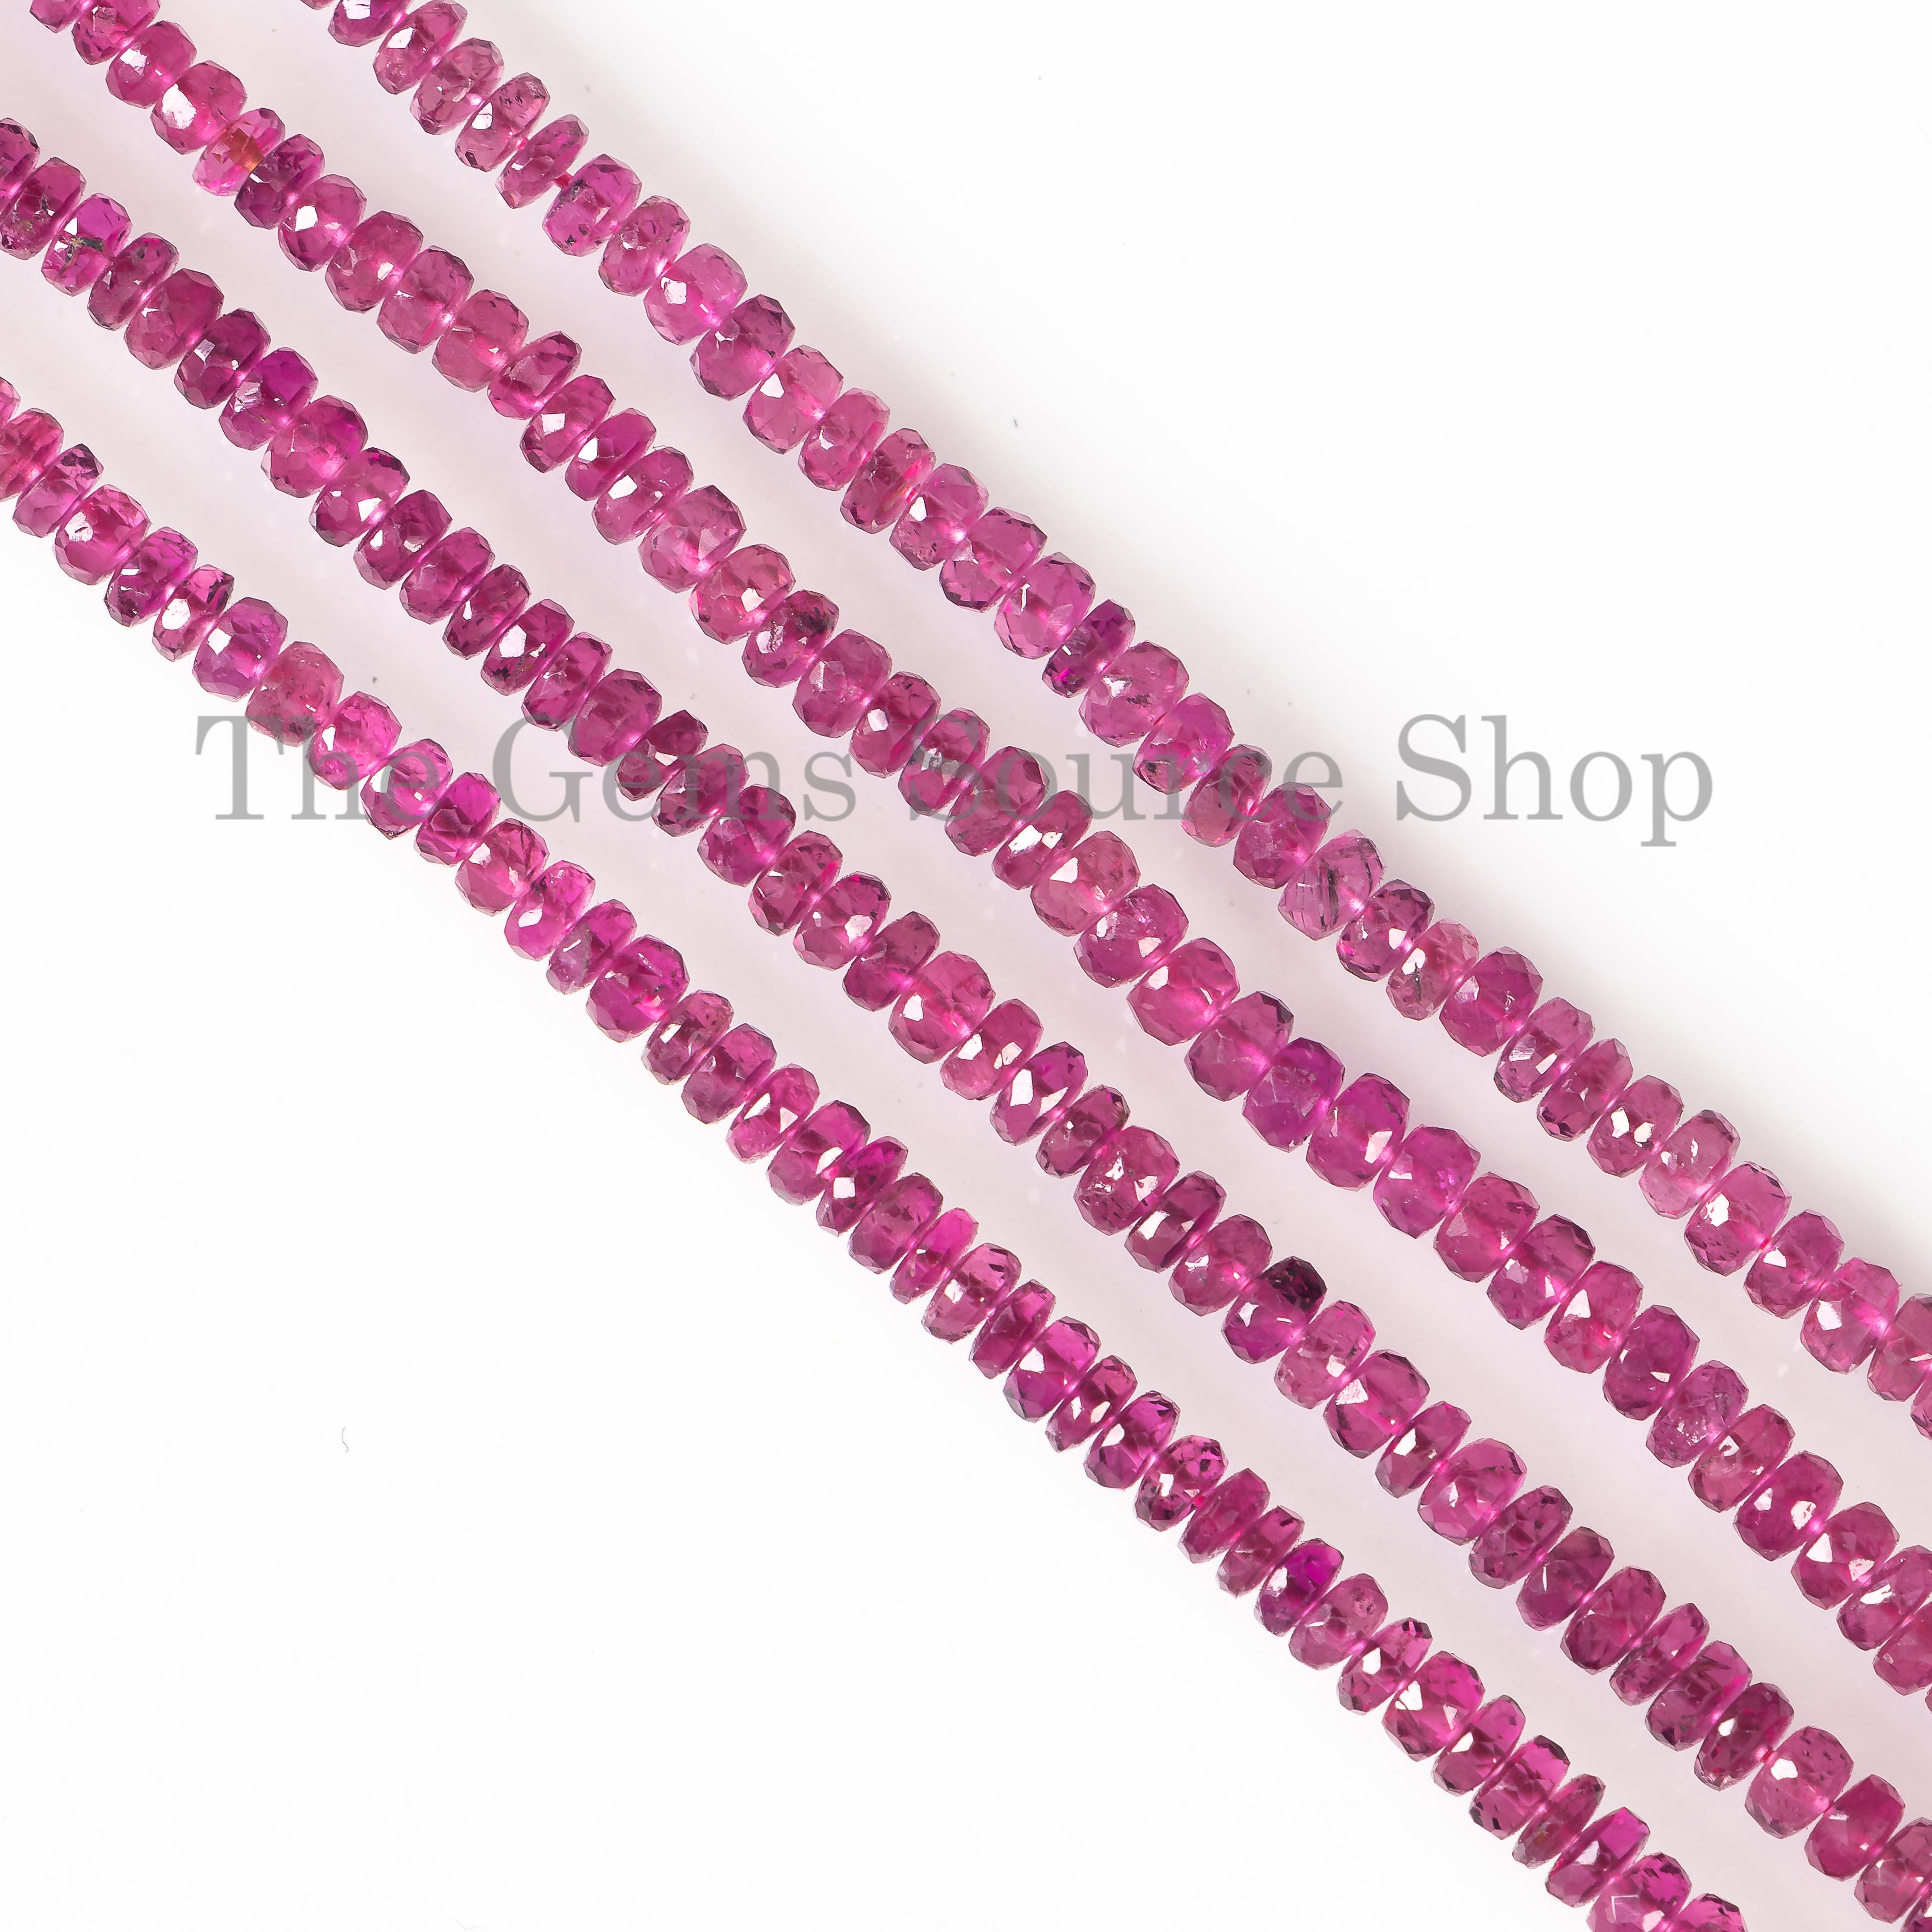 Rubellite tourmaline faceted rondelle shape Beads For Jewelry TGS-4681